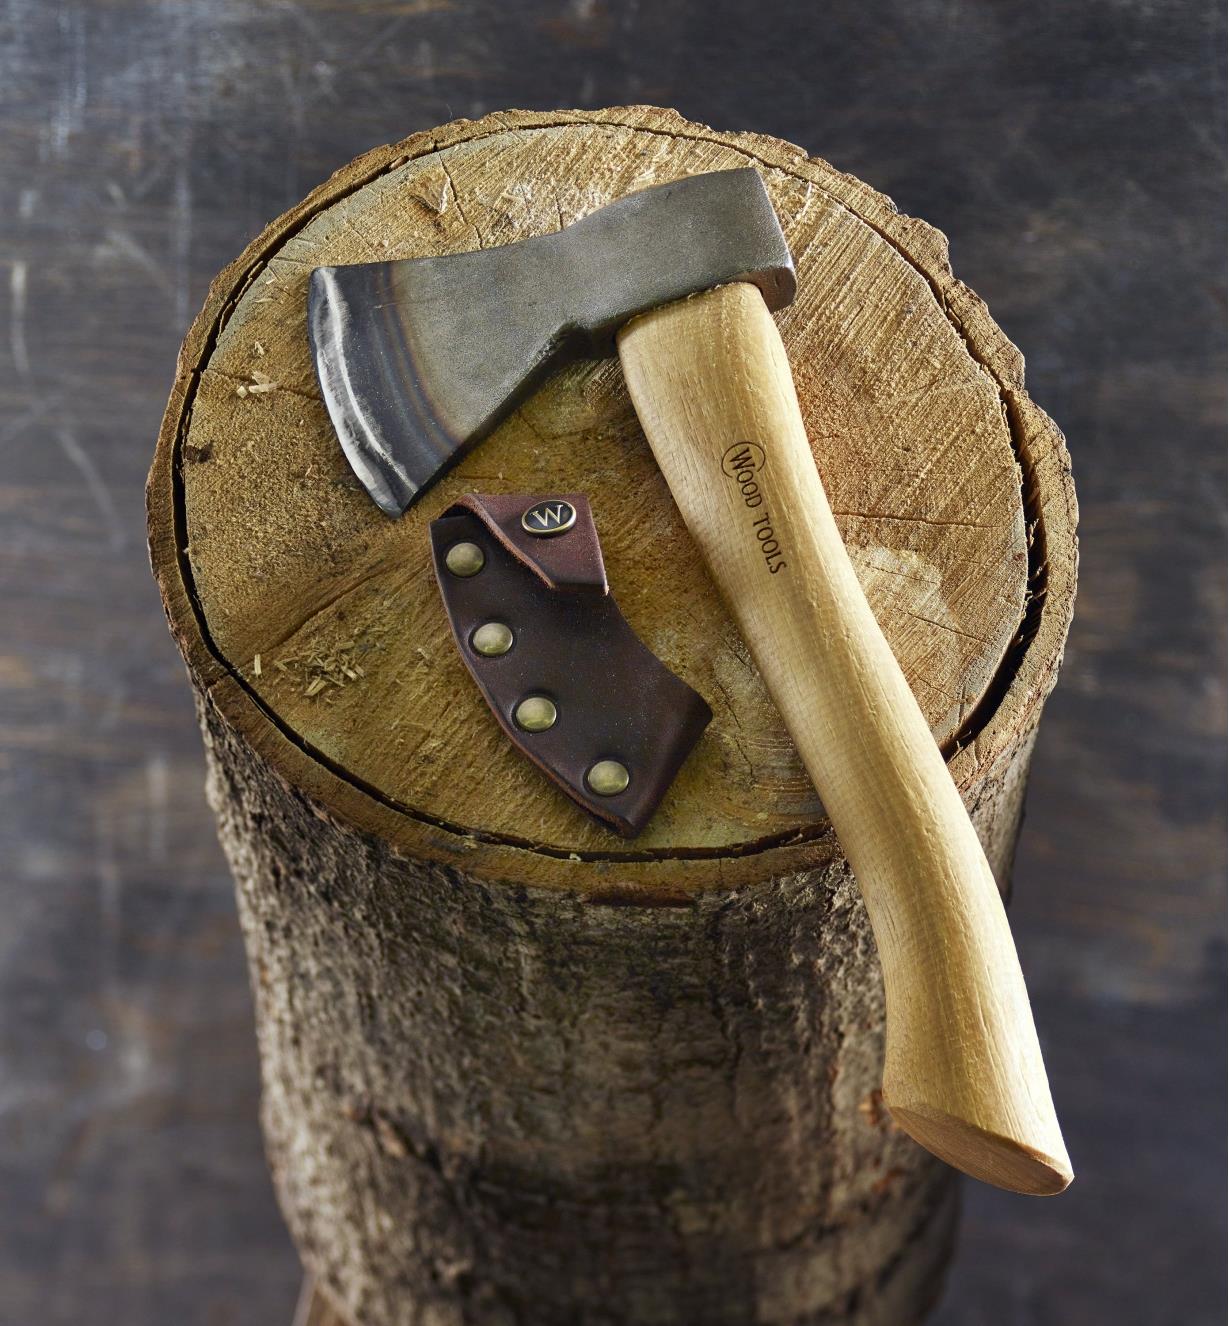 A carving axe and sheath rest on a tree stump